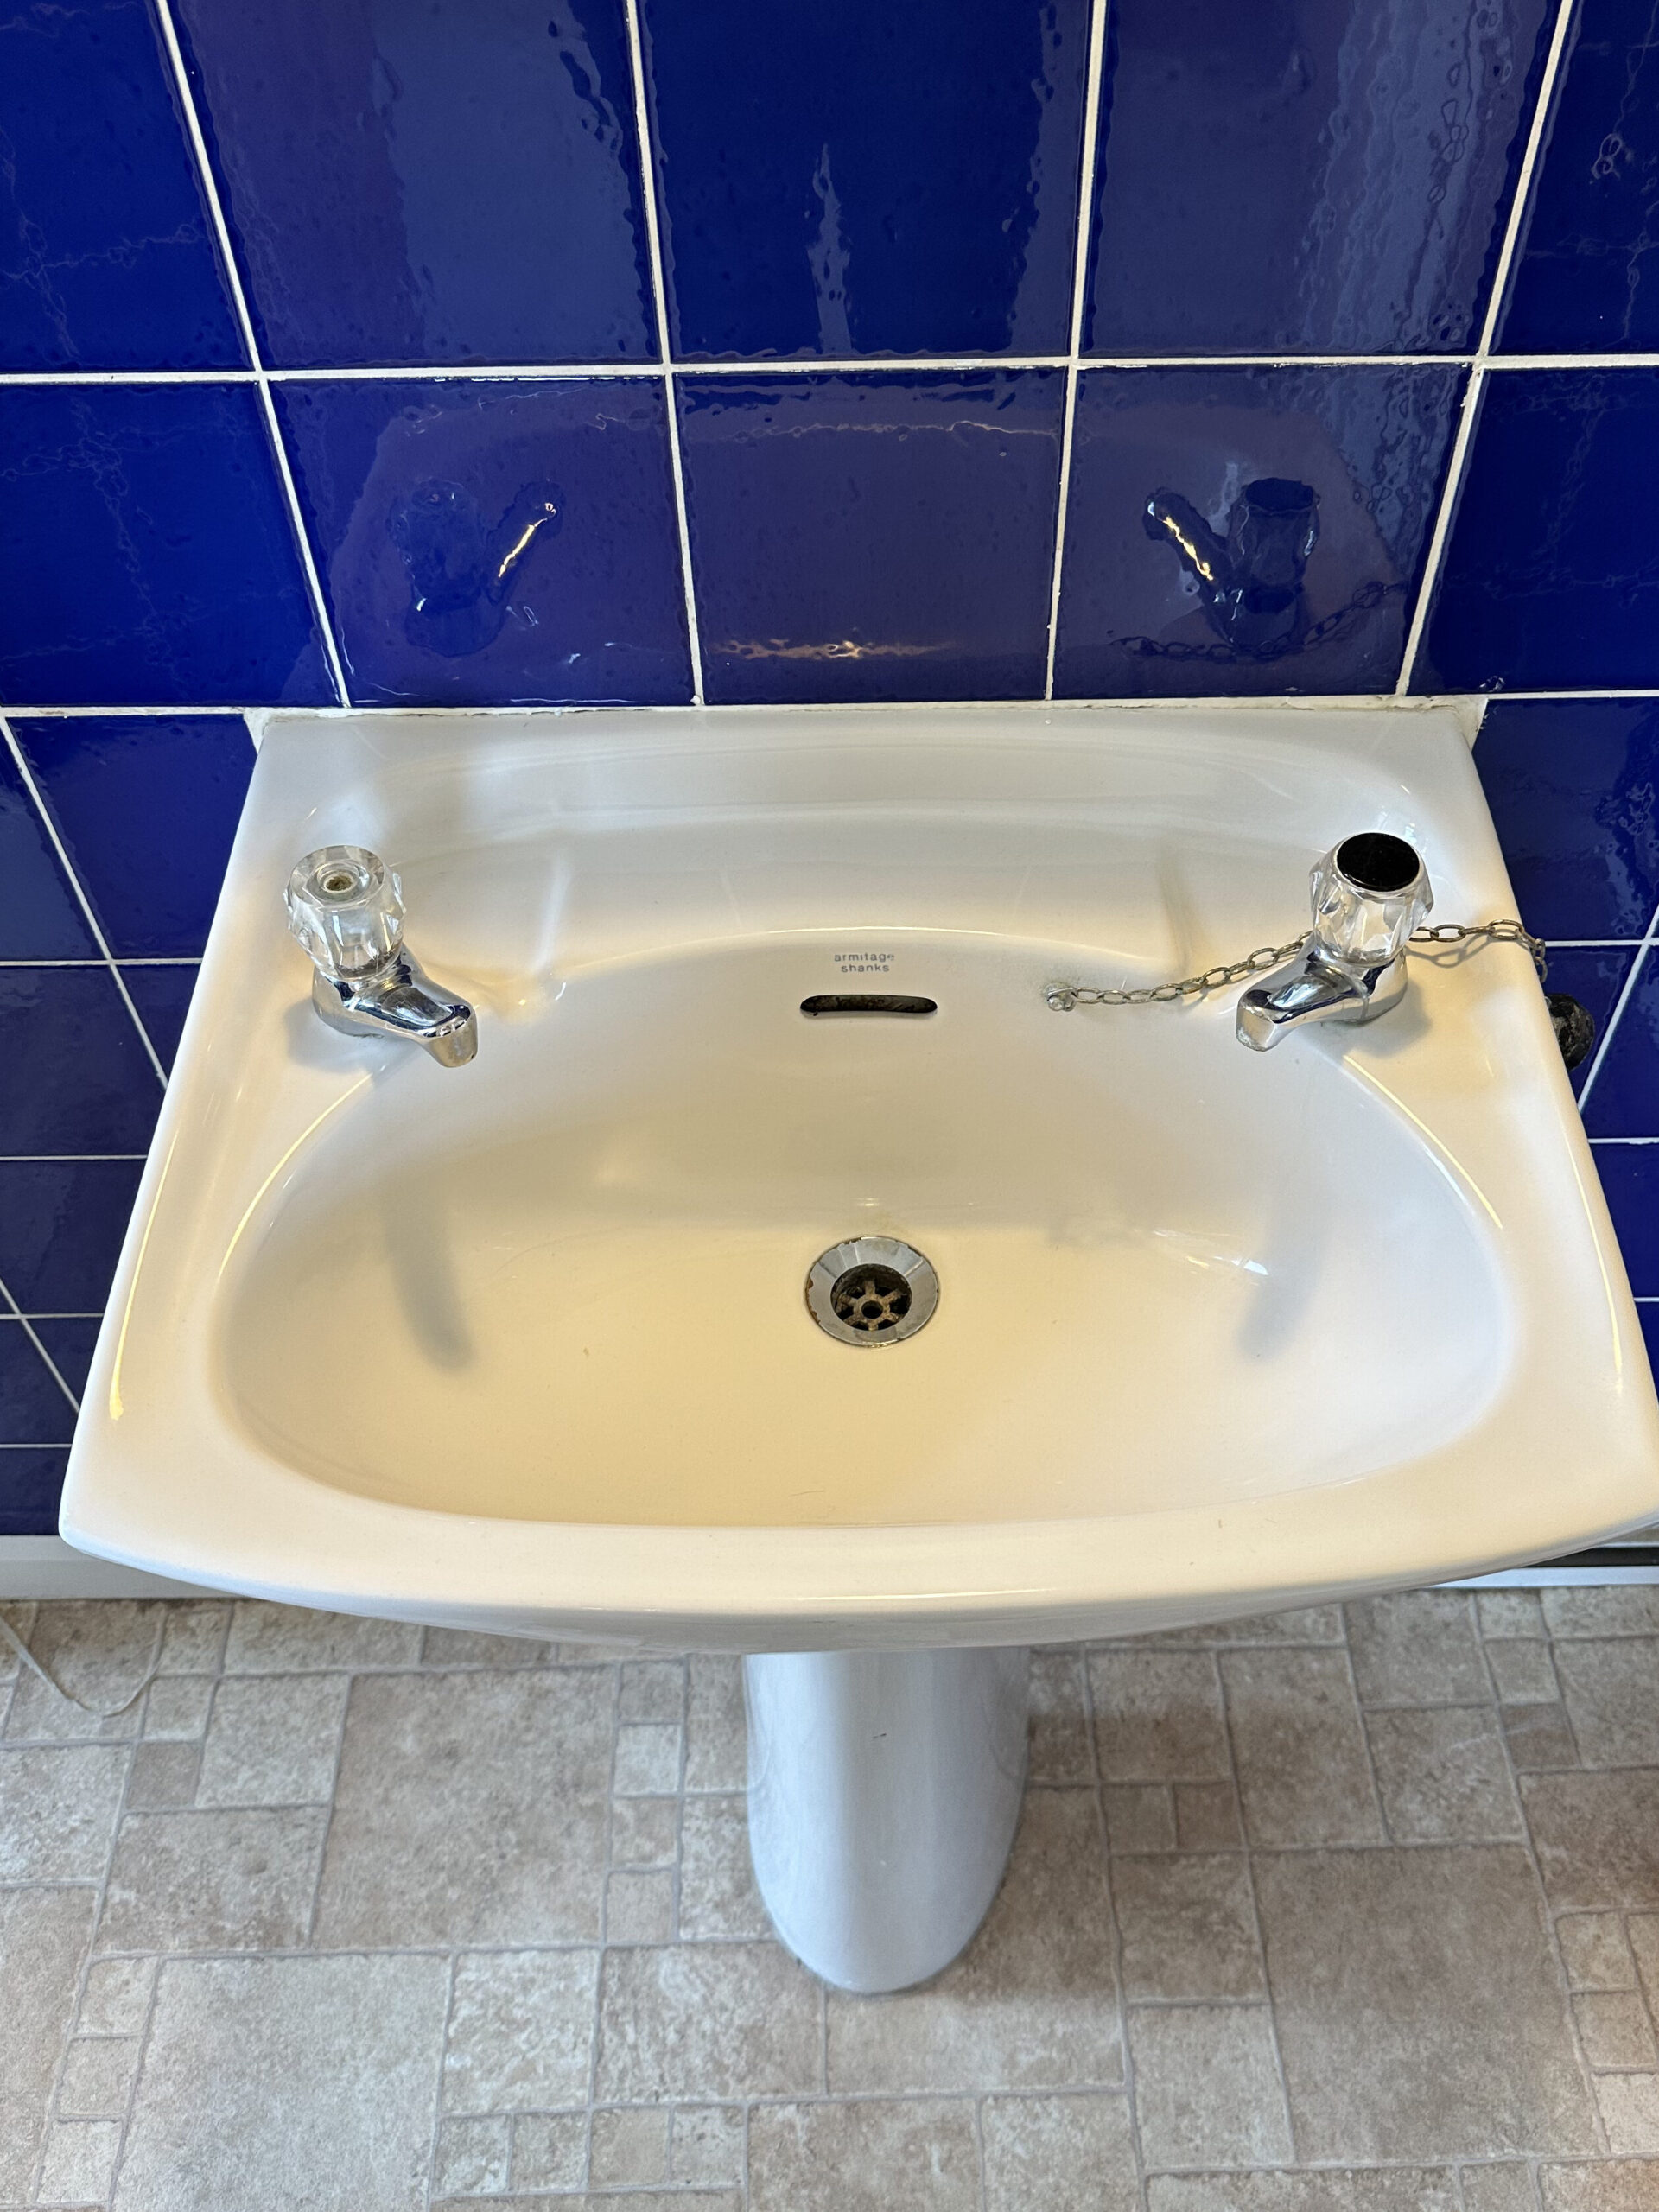 Clean bathroom sink after professional clean